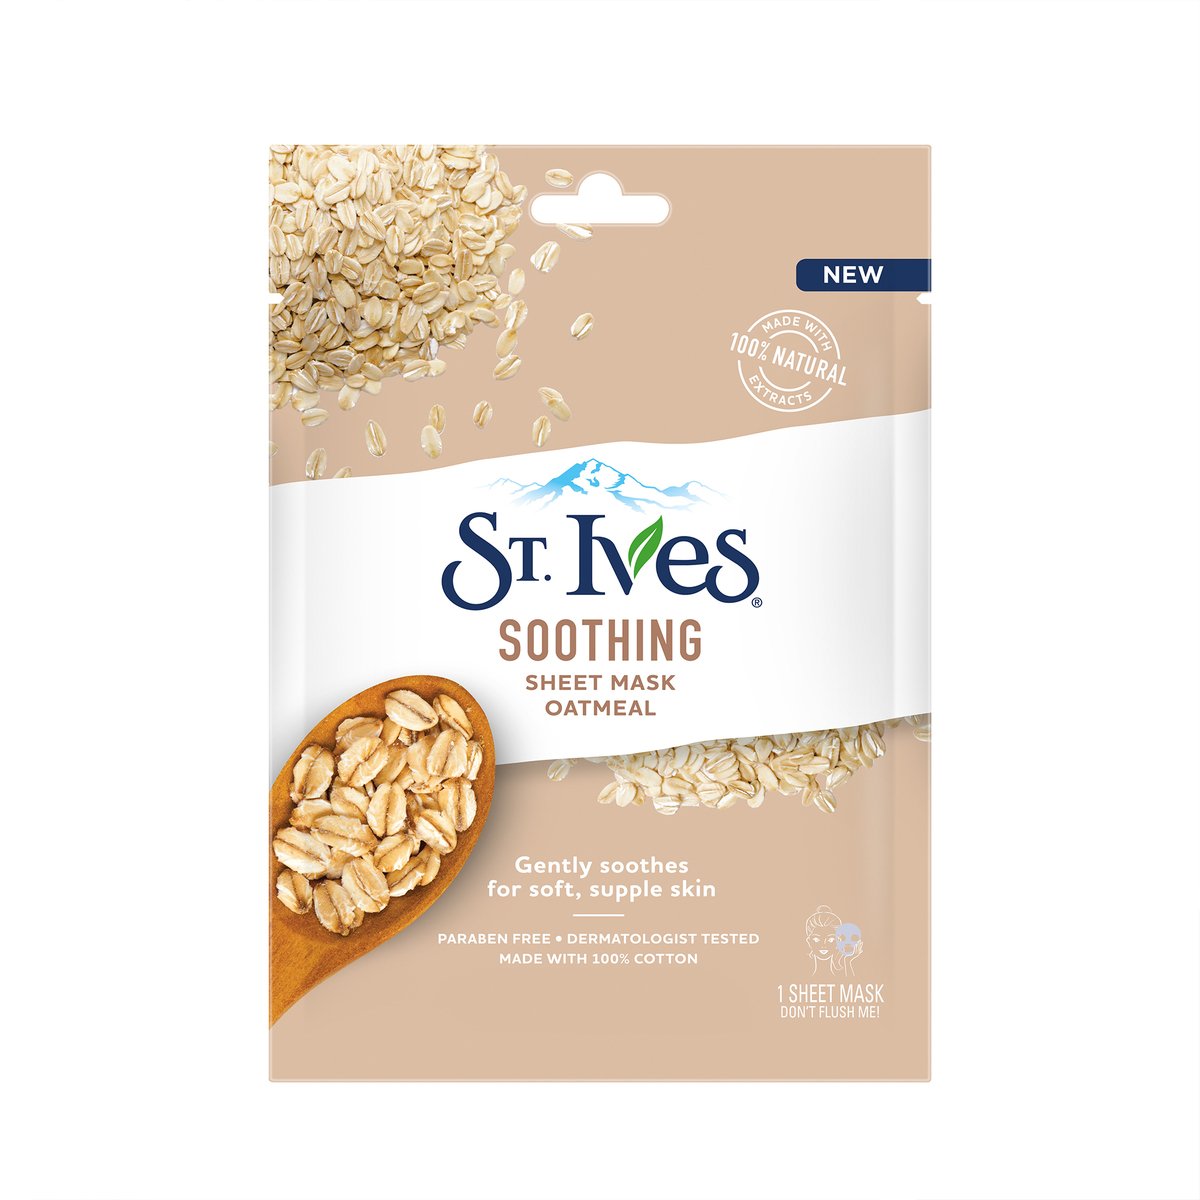 St. Ives Soothing Oatmeal Sheet Mask 1 pc